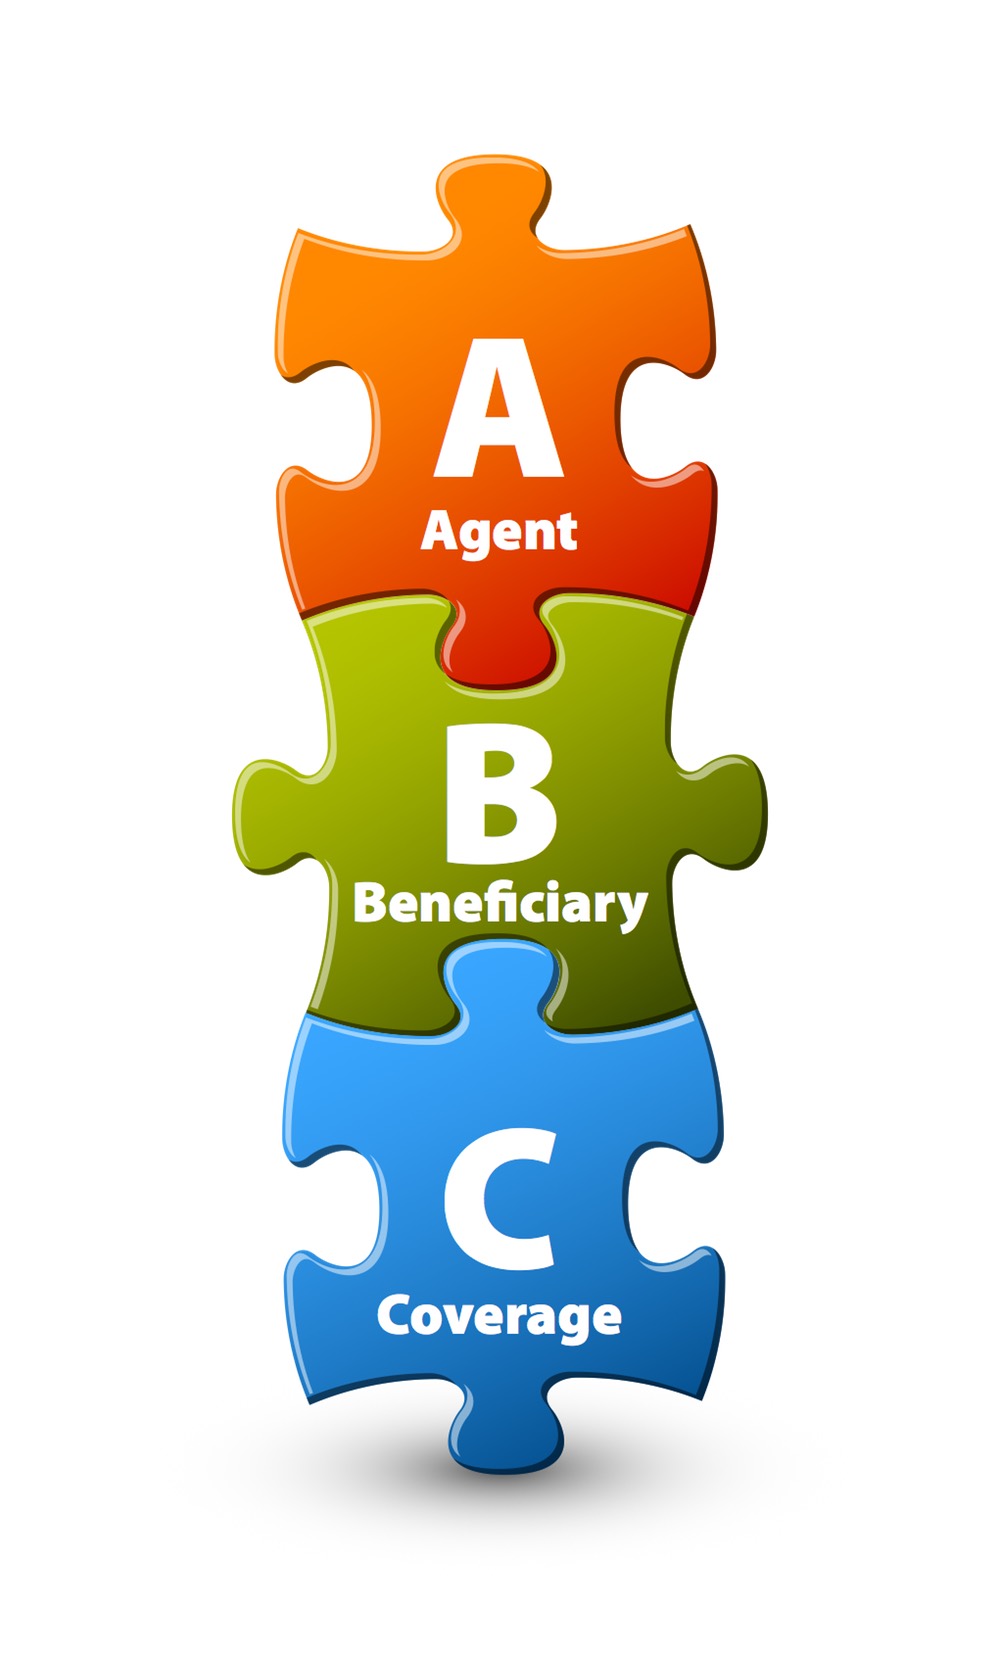 The ABCs of Insurance